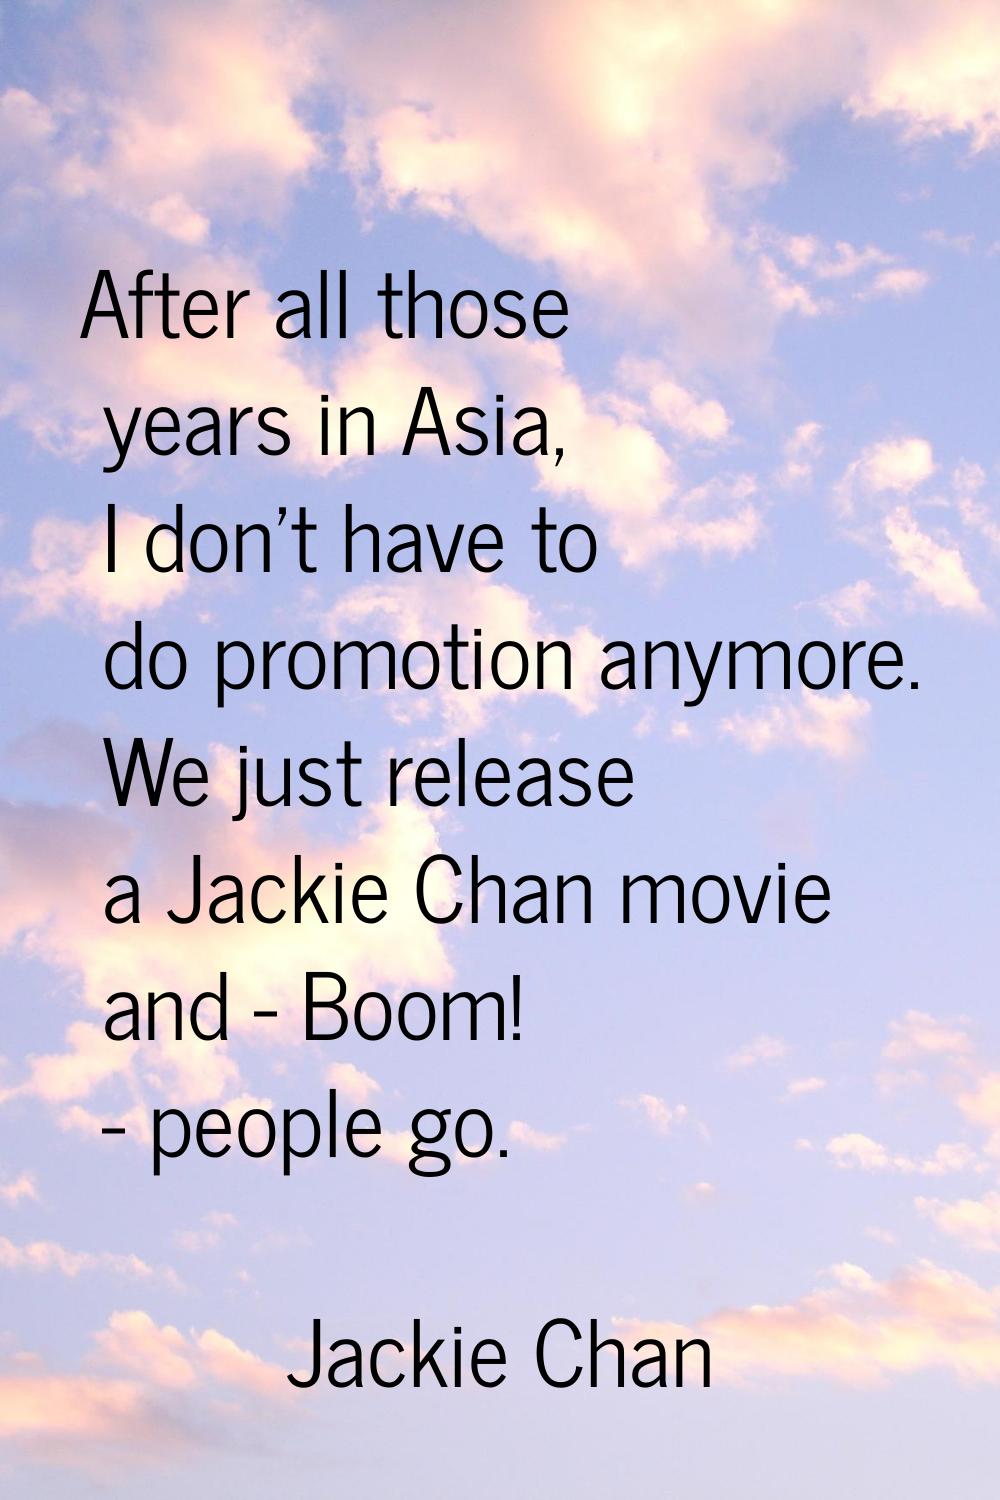 After all those years in Asia, I don't have to do promotion anymore. We just release a Jackie Chan 